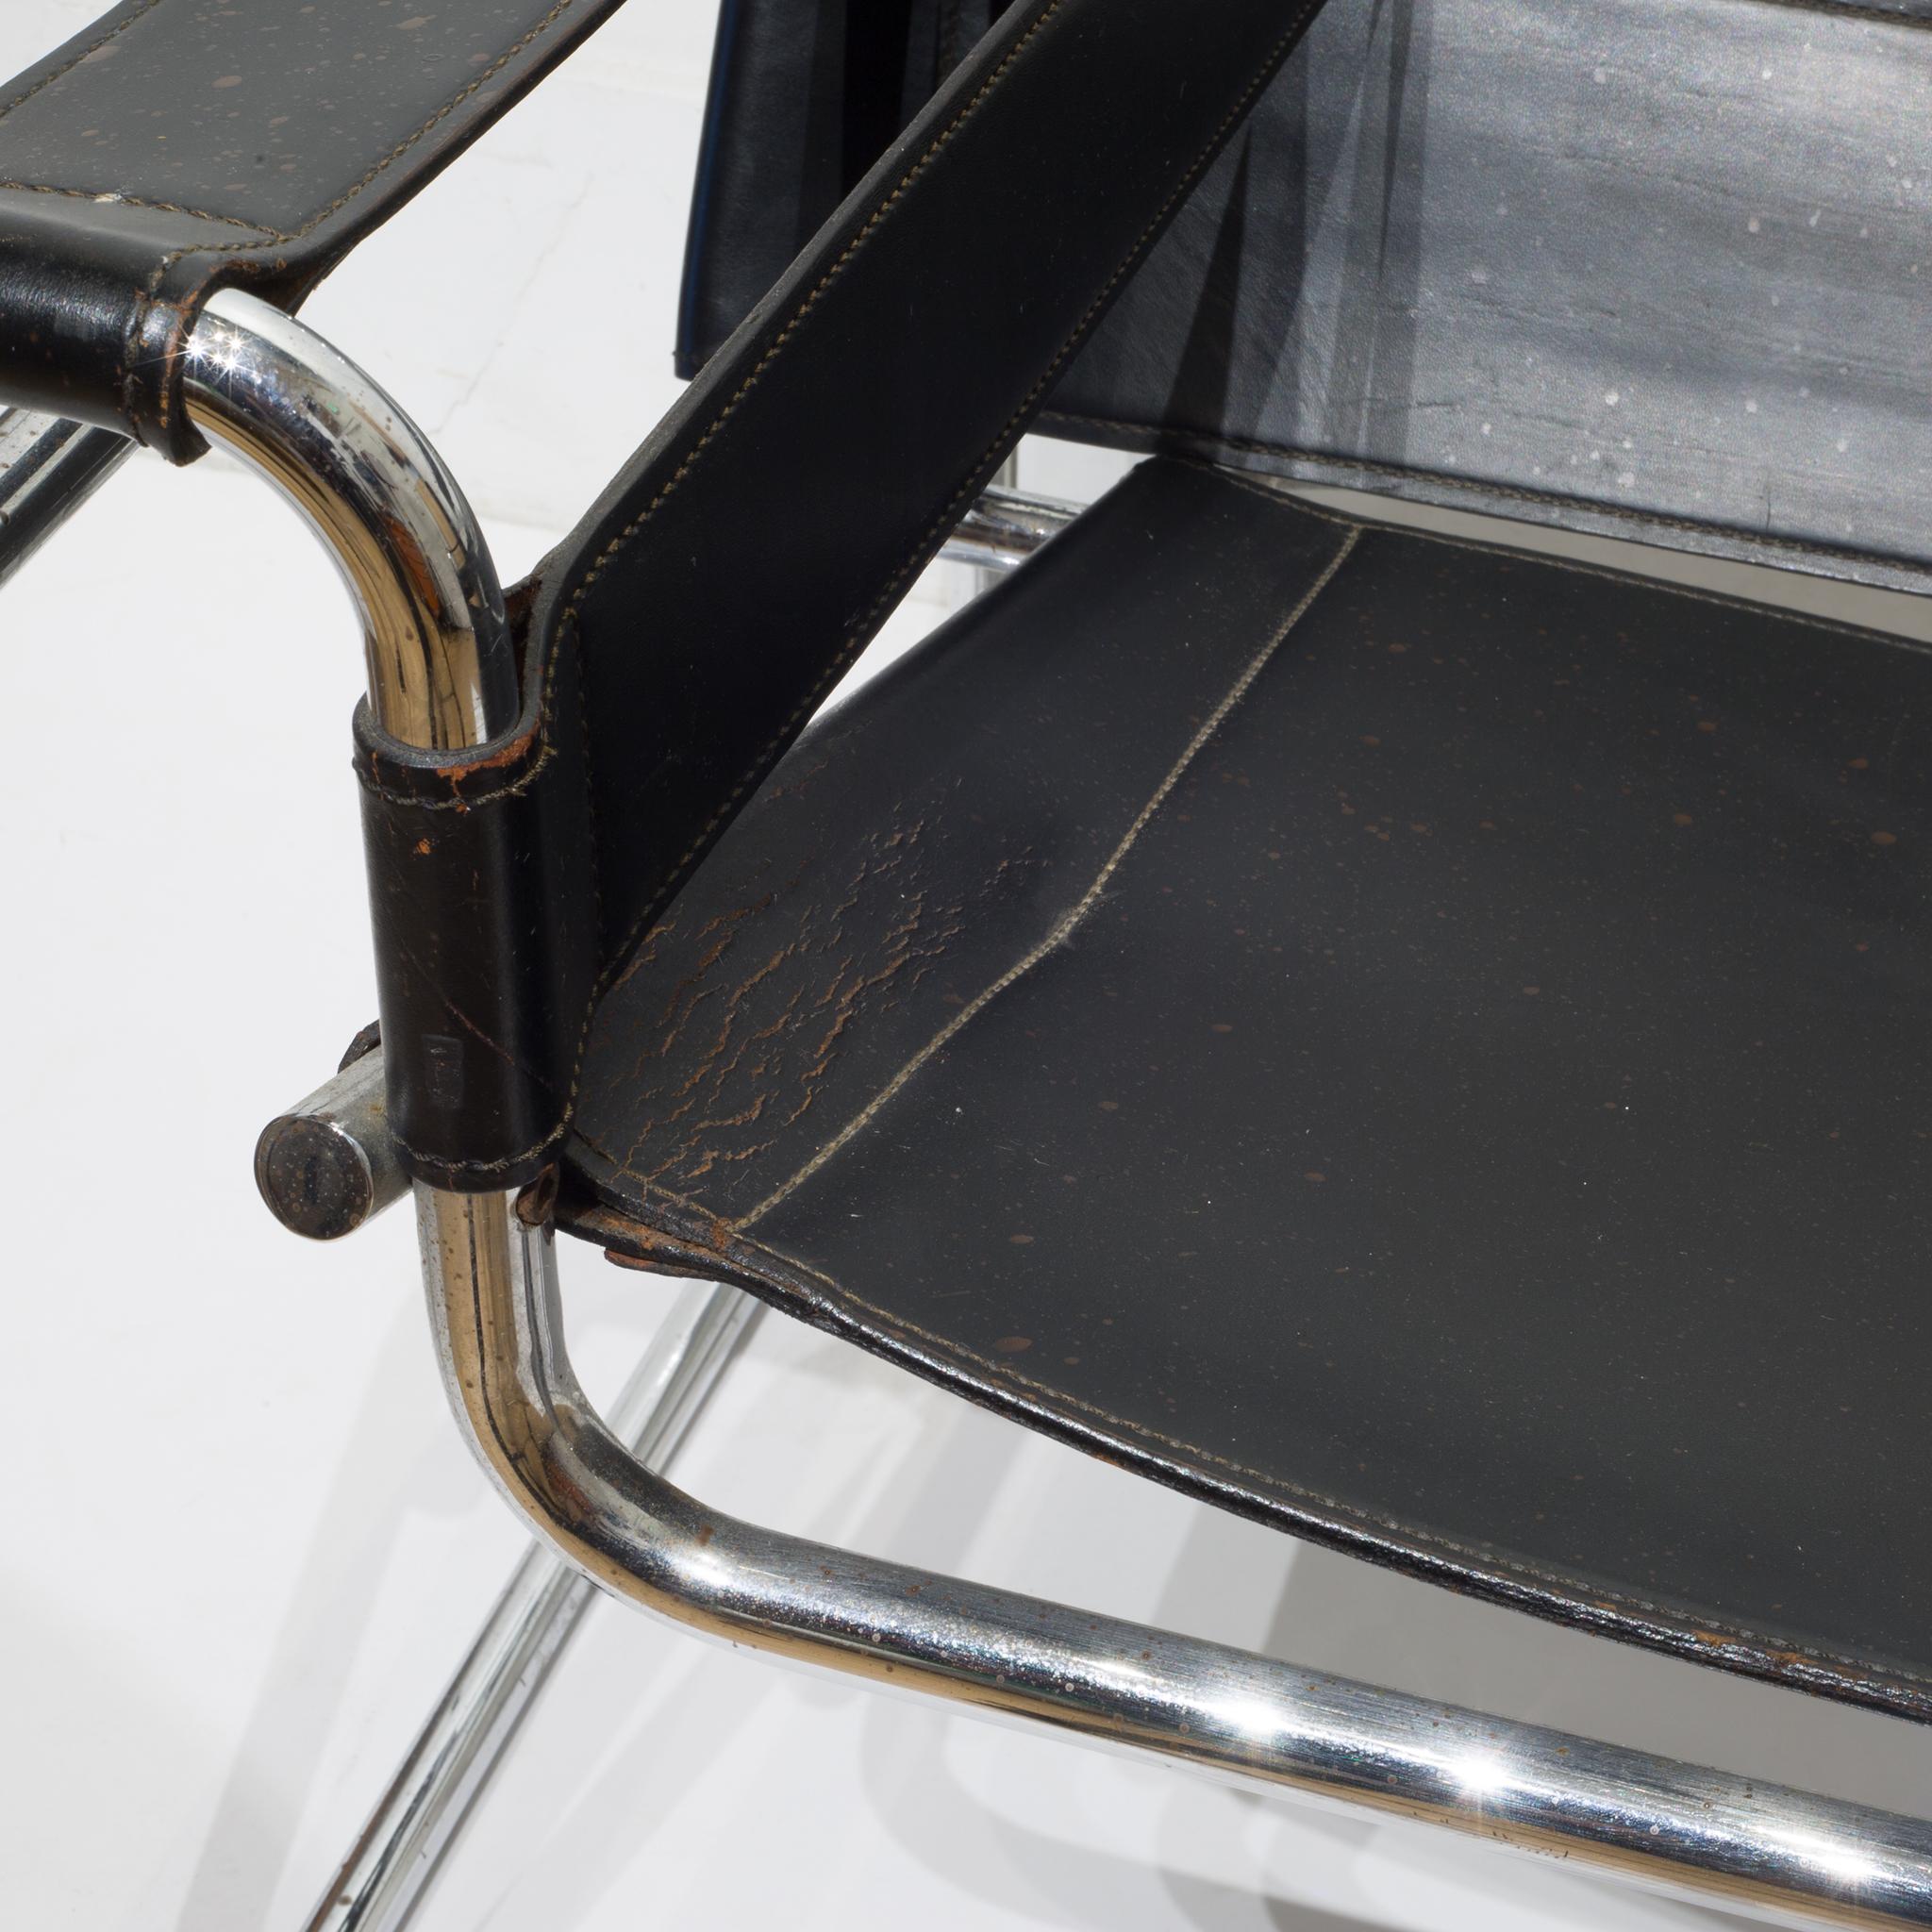 Midcentury Leather Marcel Wander For Knoll Wassily Chair Circa 1950 1960 At 1stdibs